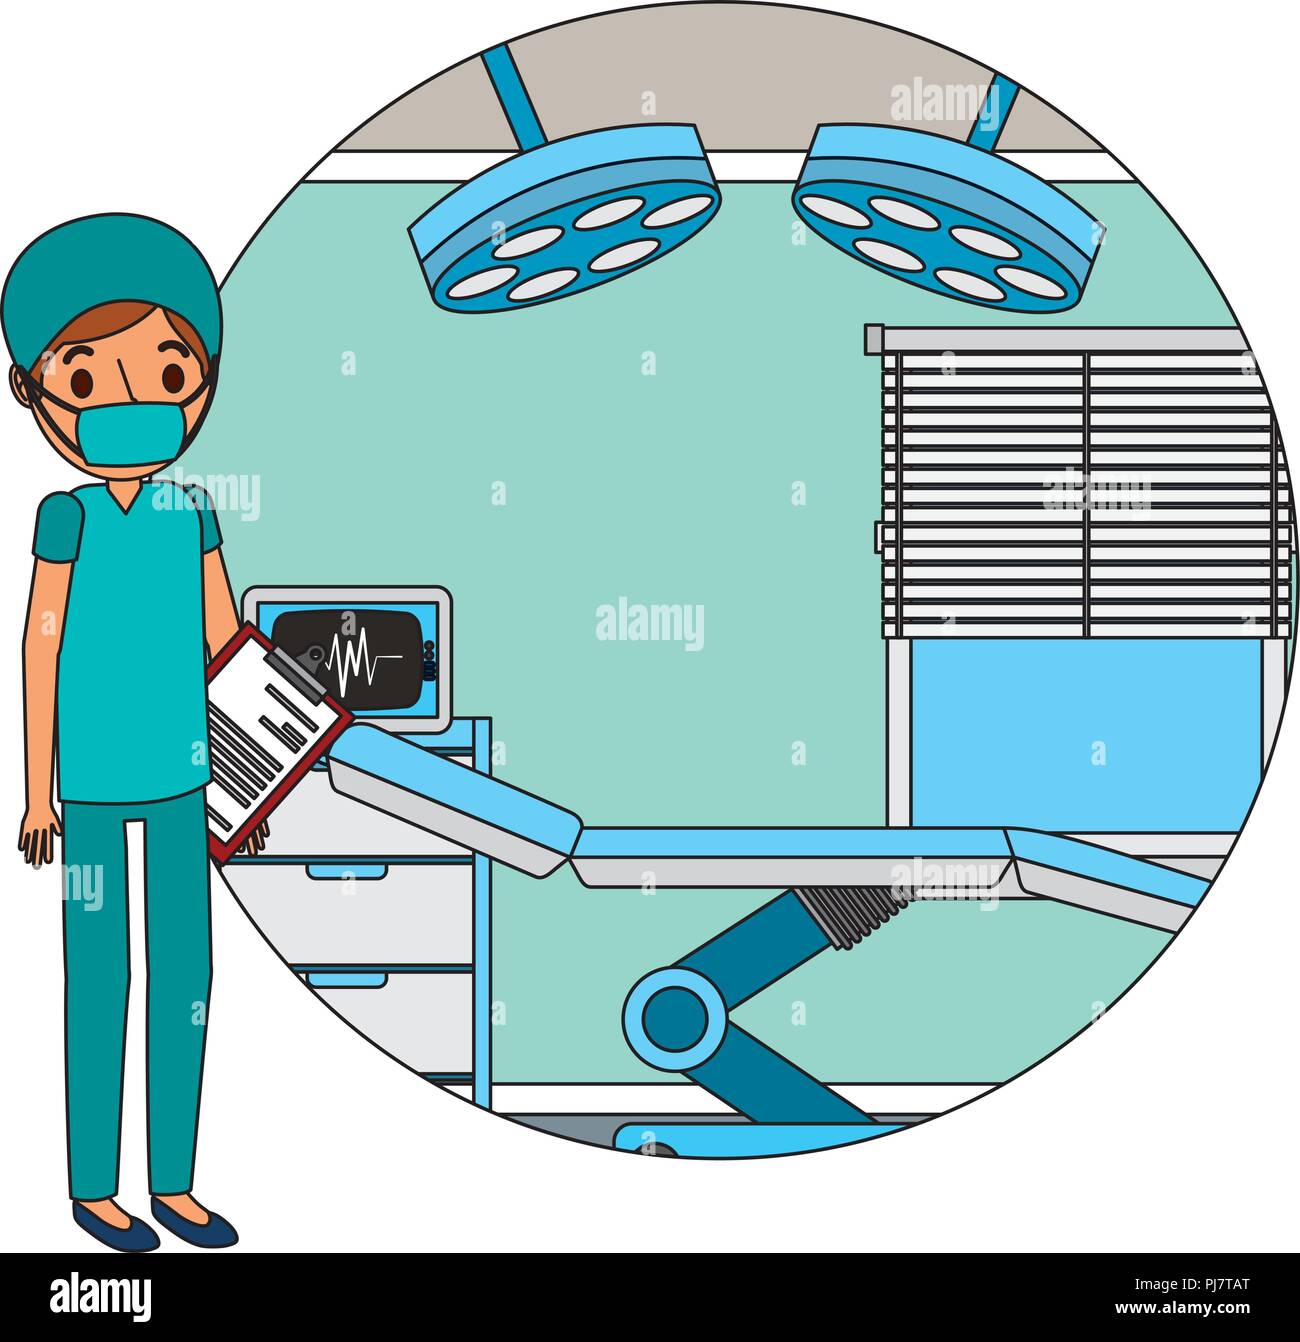 doctor professional in room equipped in a hospital vector illustration ...